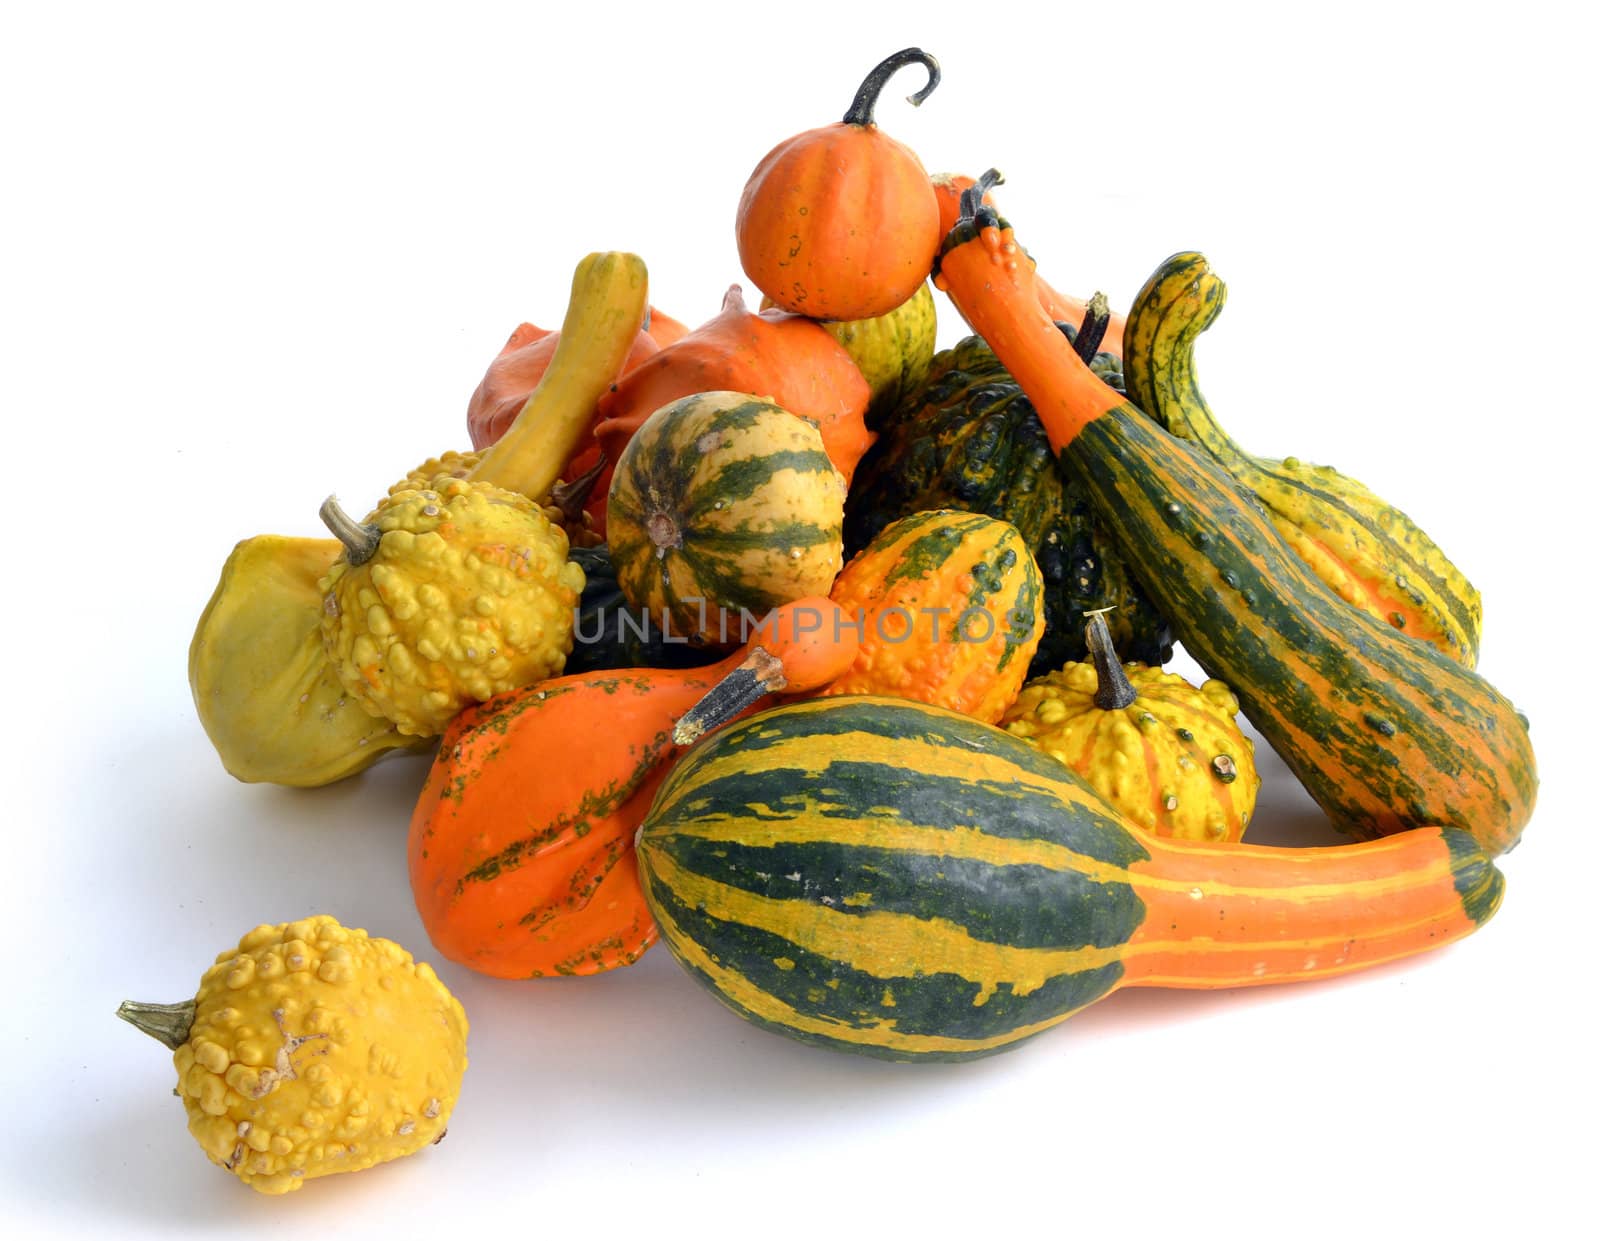 Bunch of gourds of different color and shape